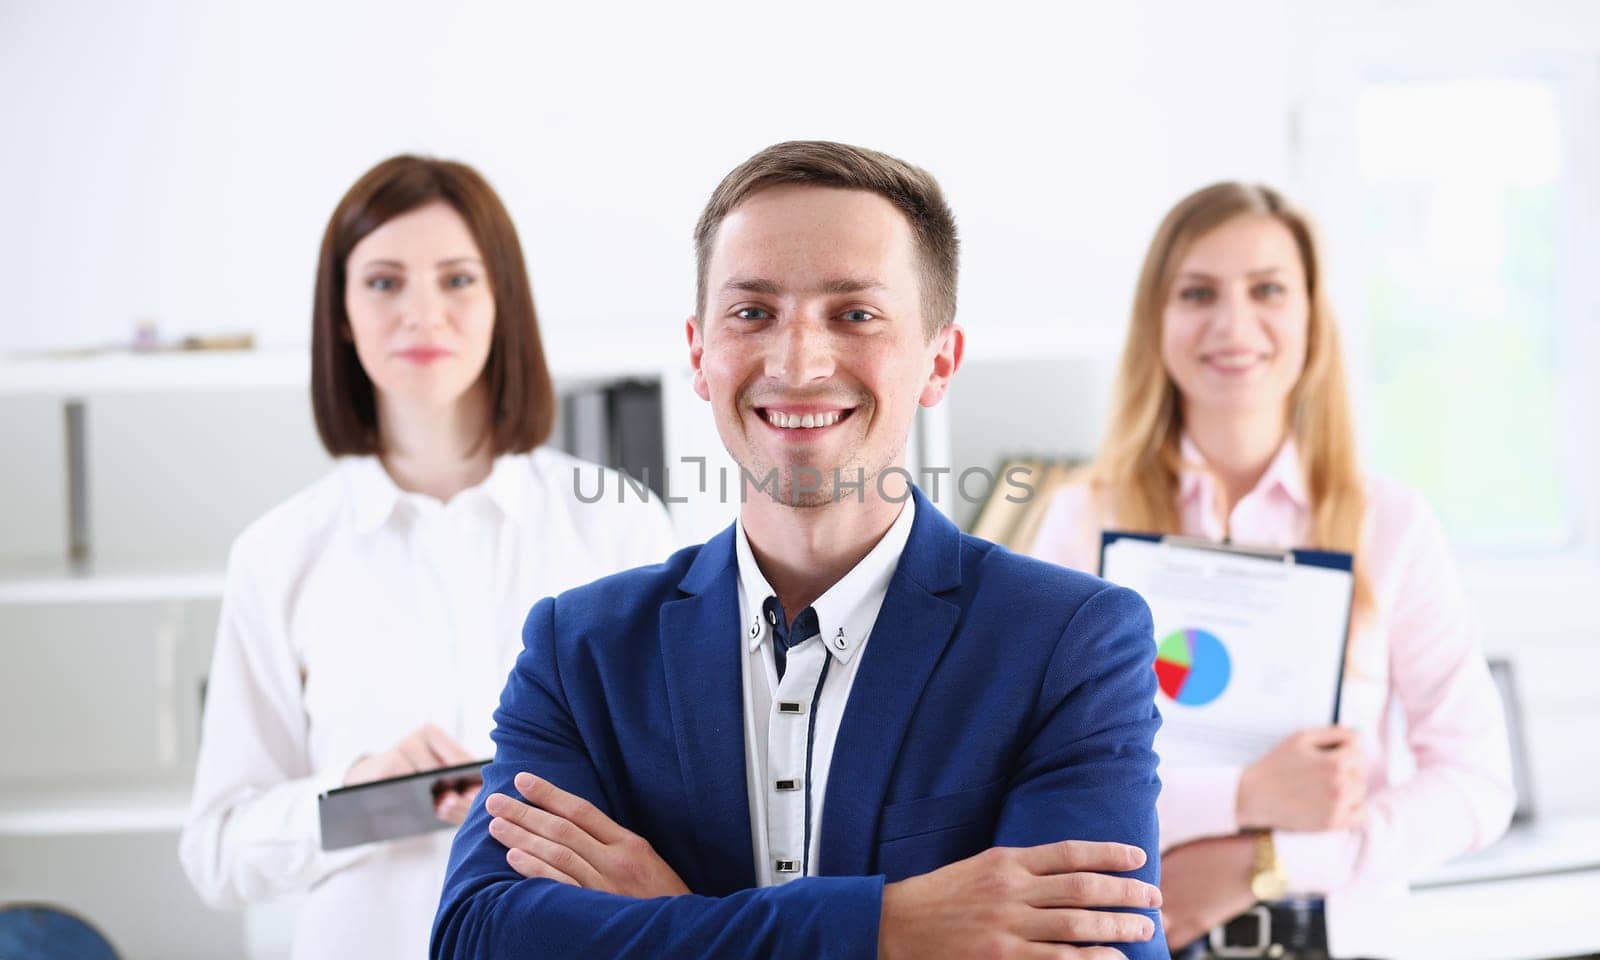 Group of smiling people stand in office looking in camera portrait. White collar power mediation solution project creative advisor participation profession train bank lawyer client visit concept